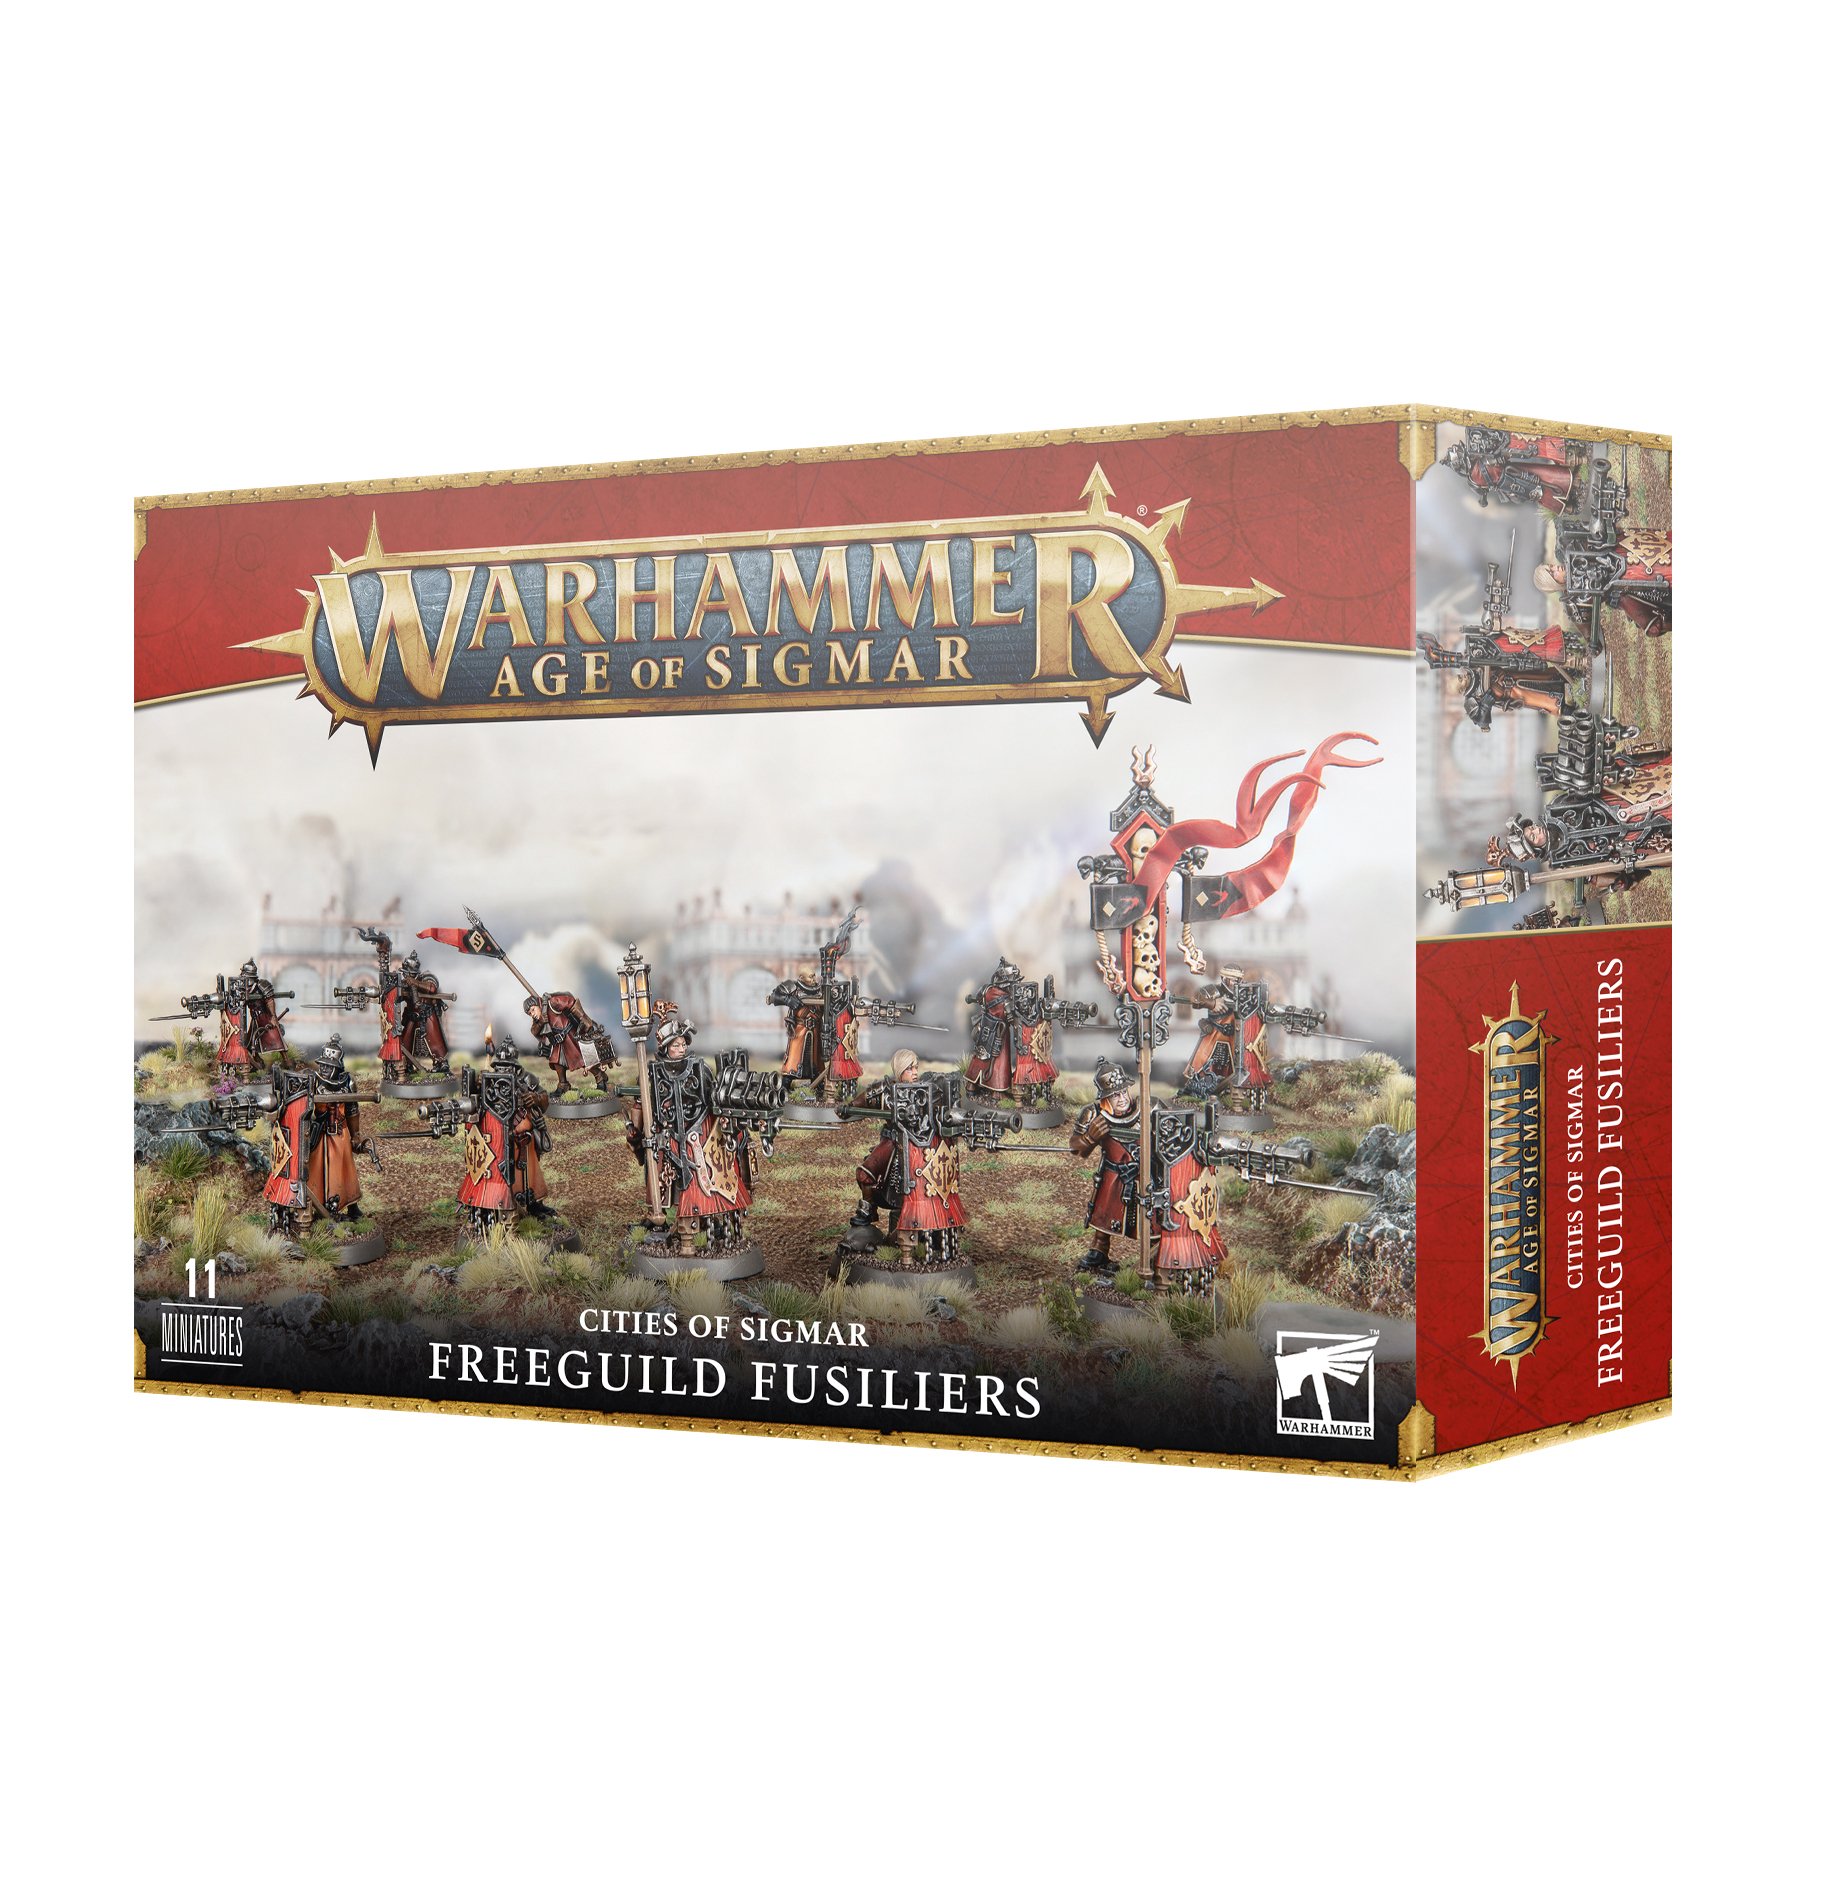 Warhammer Age of Sigmar: Cities of Sigmar: Freeguild Fusiliers 